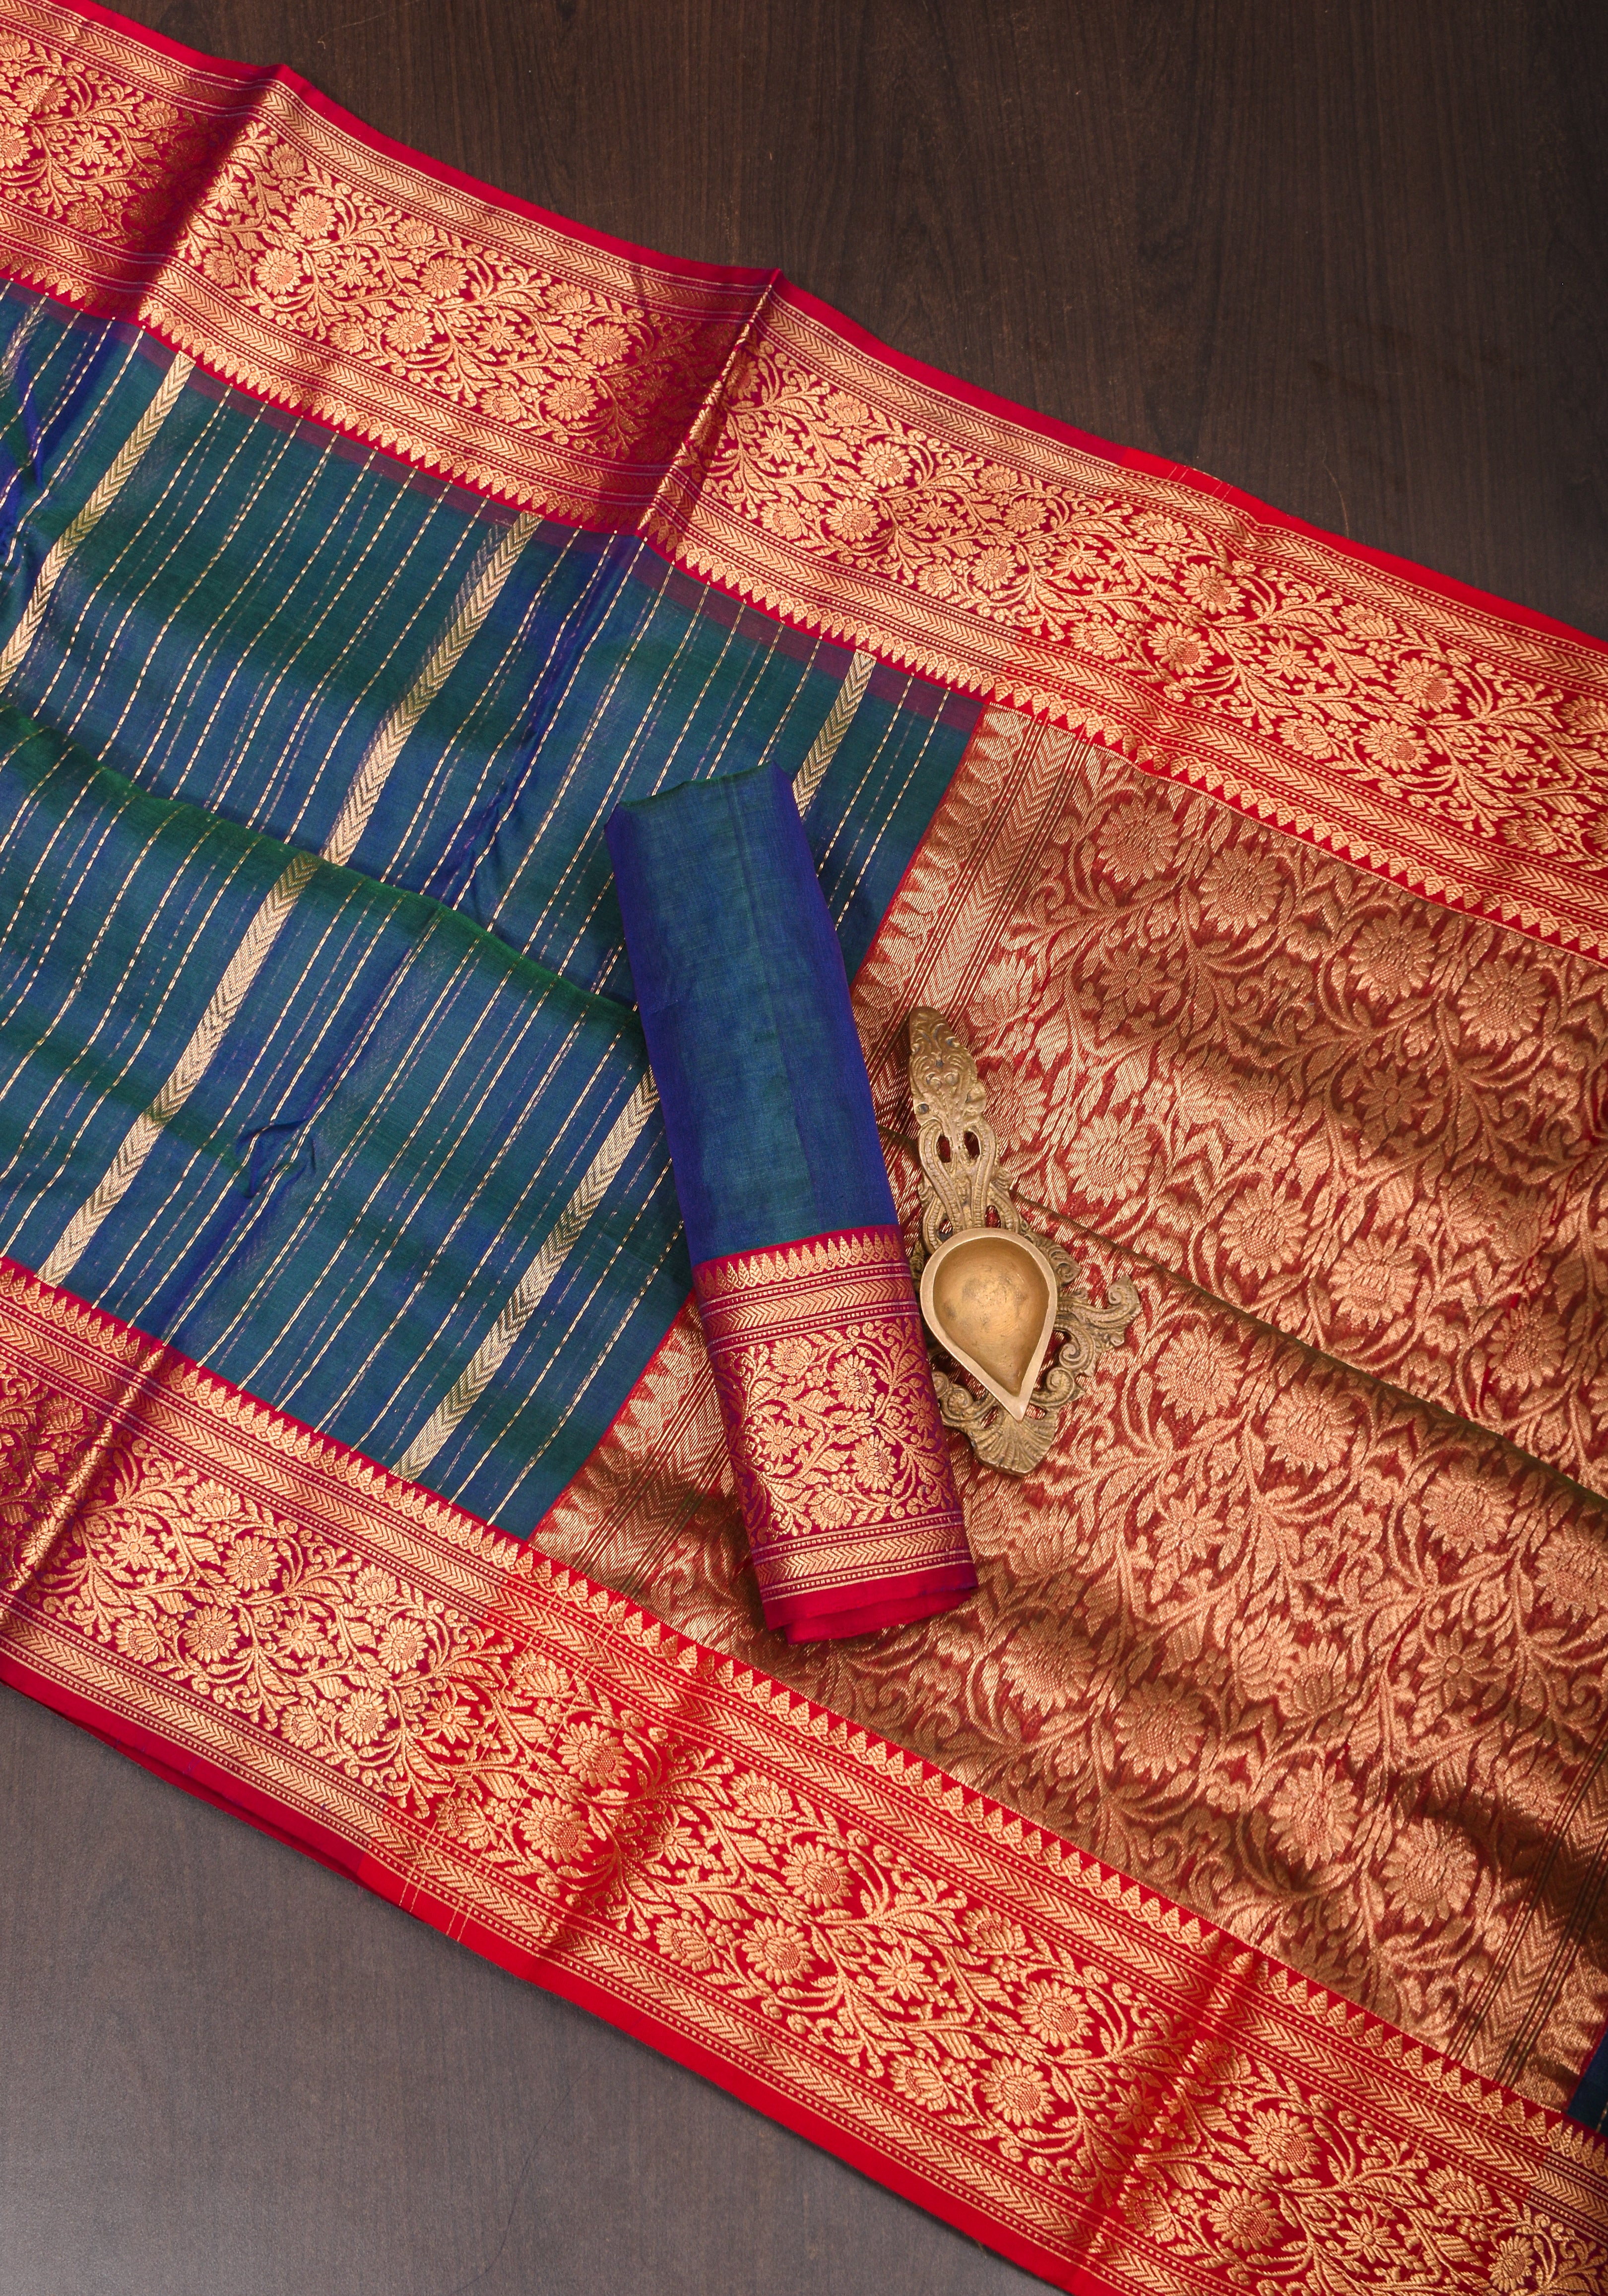 Stunning Striped Peacock Green and blue dual tone Chanderi Silk Saree with Contrast Red Border